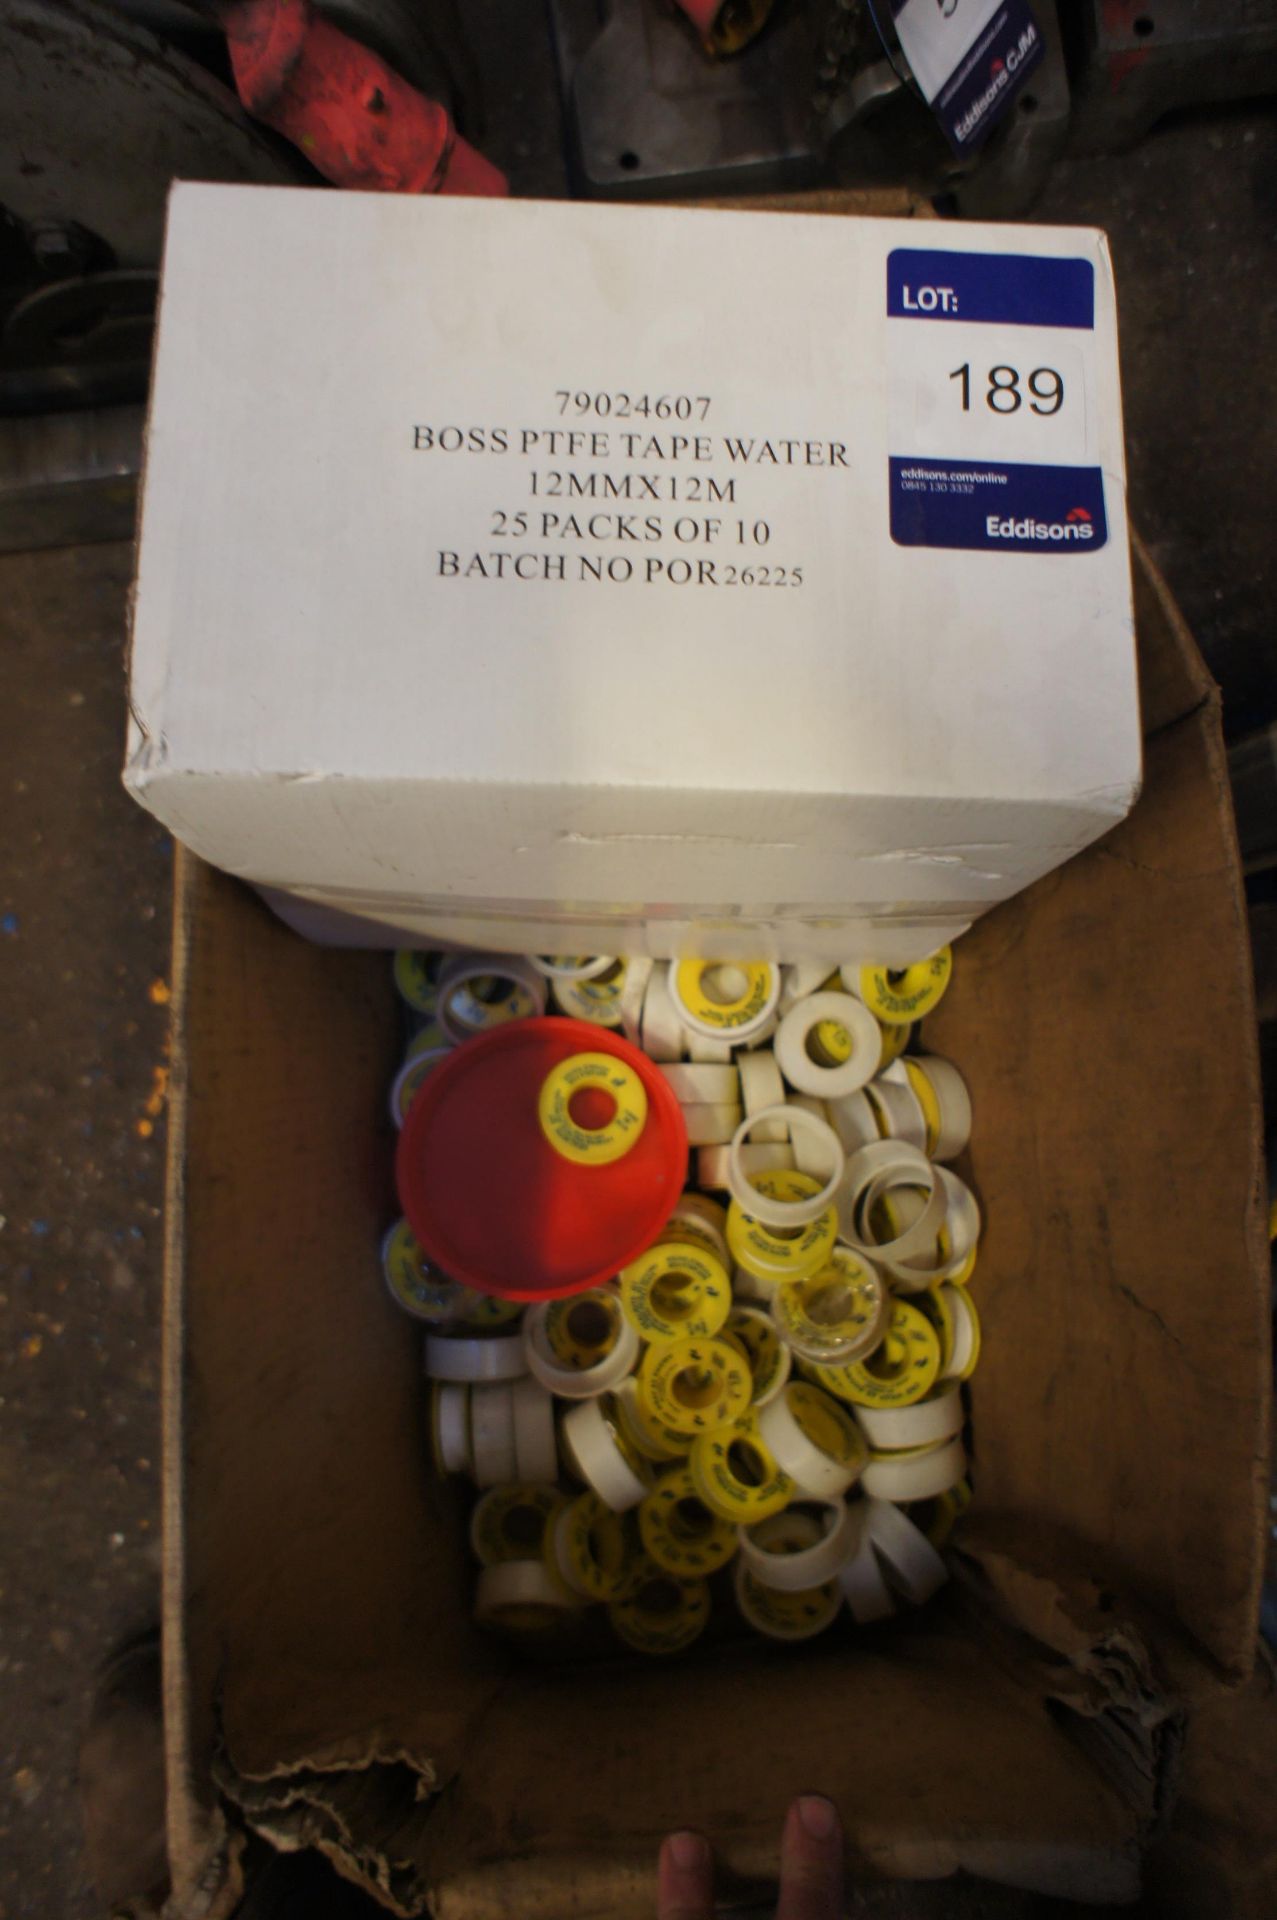 Approx. 300 Rolls of PTFE Tape (water) to 2 boxes